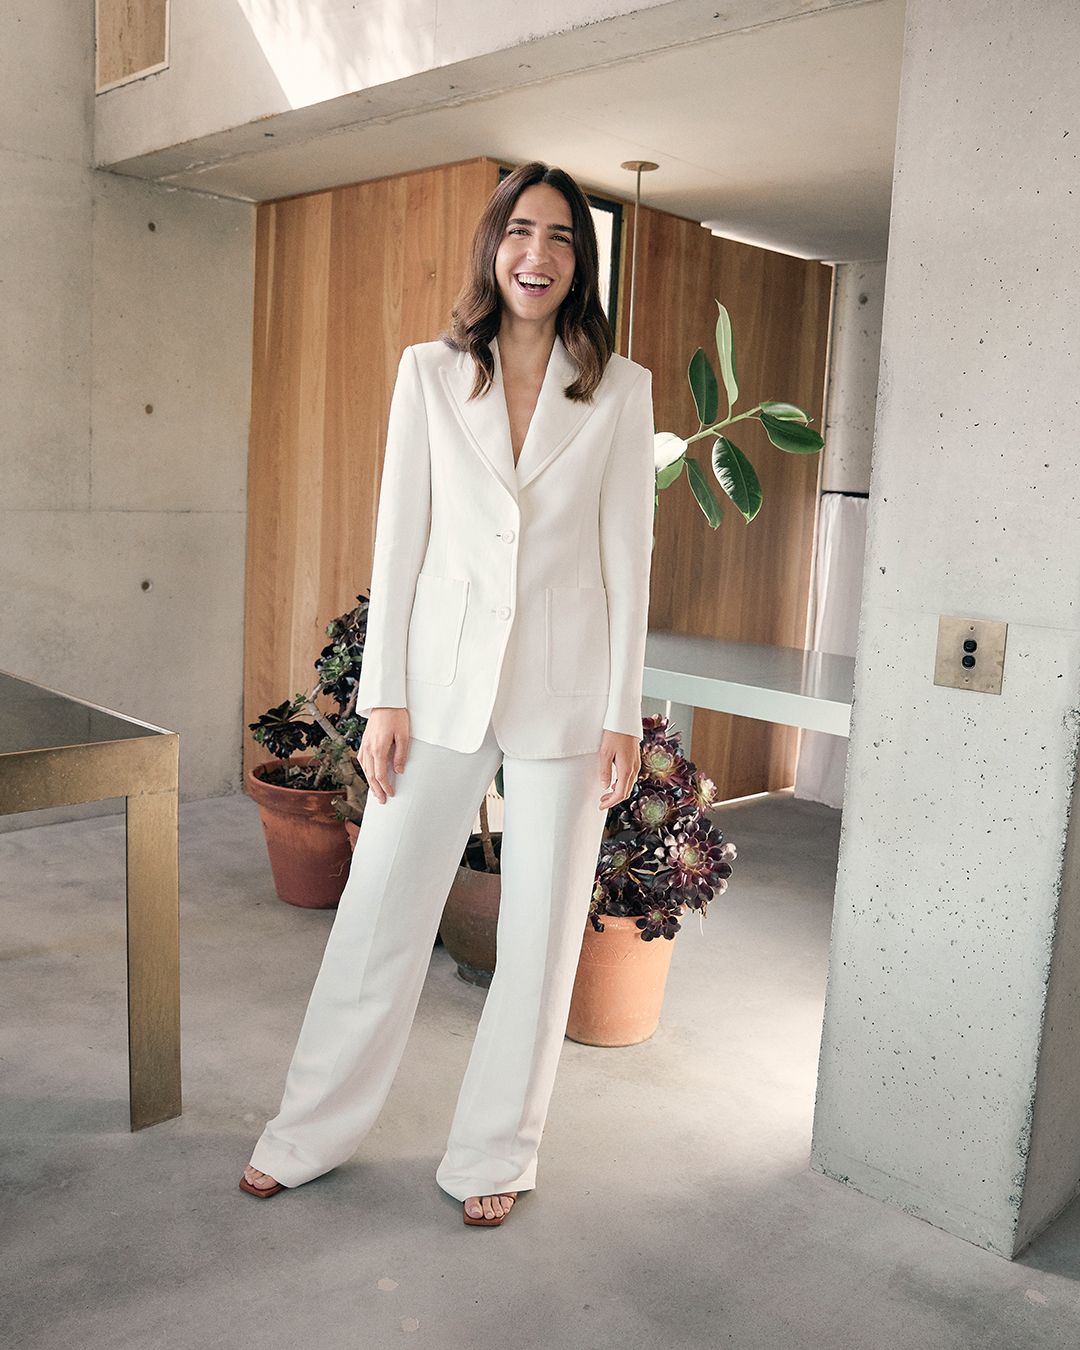 Bianca Marchi standing in a white pantsuit in an minimalistic entrance way